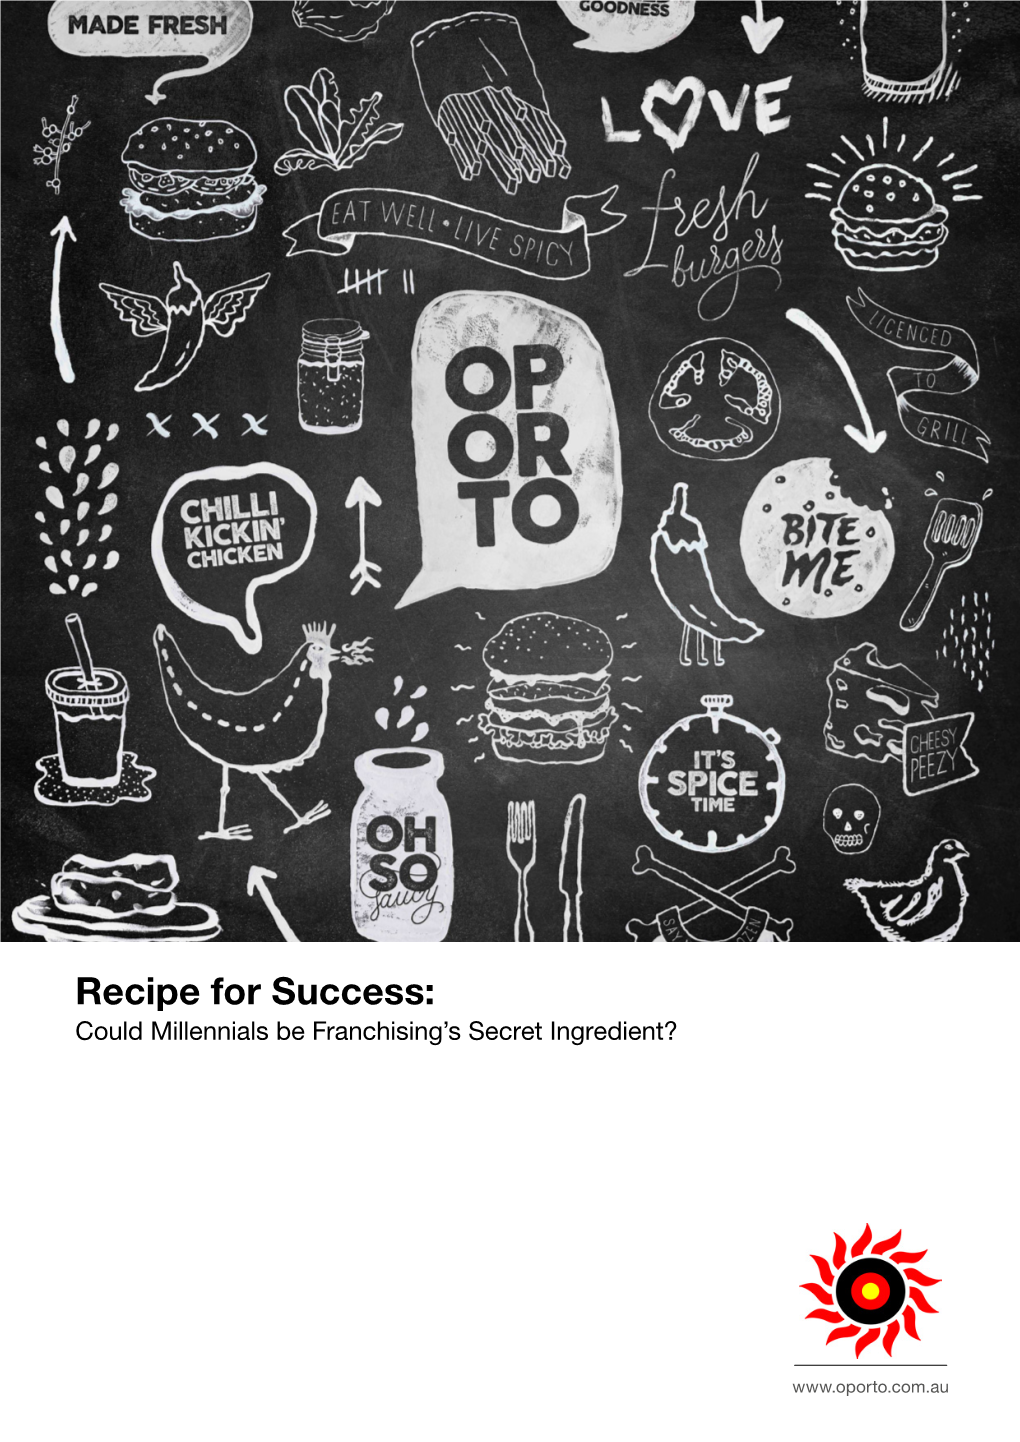 Recipe for Success: Could Millennials Be Franchising’S Secret Ingredient?